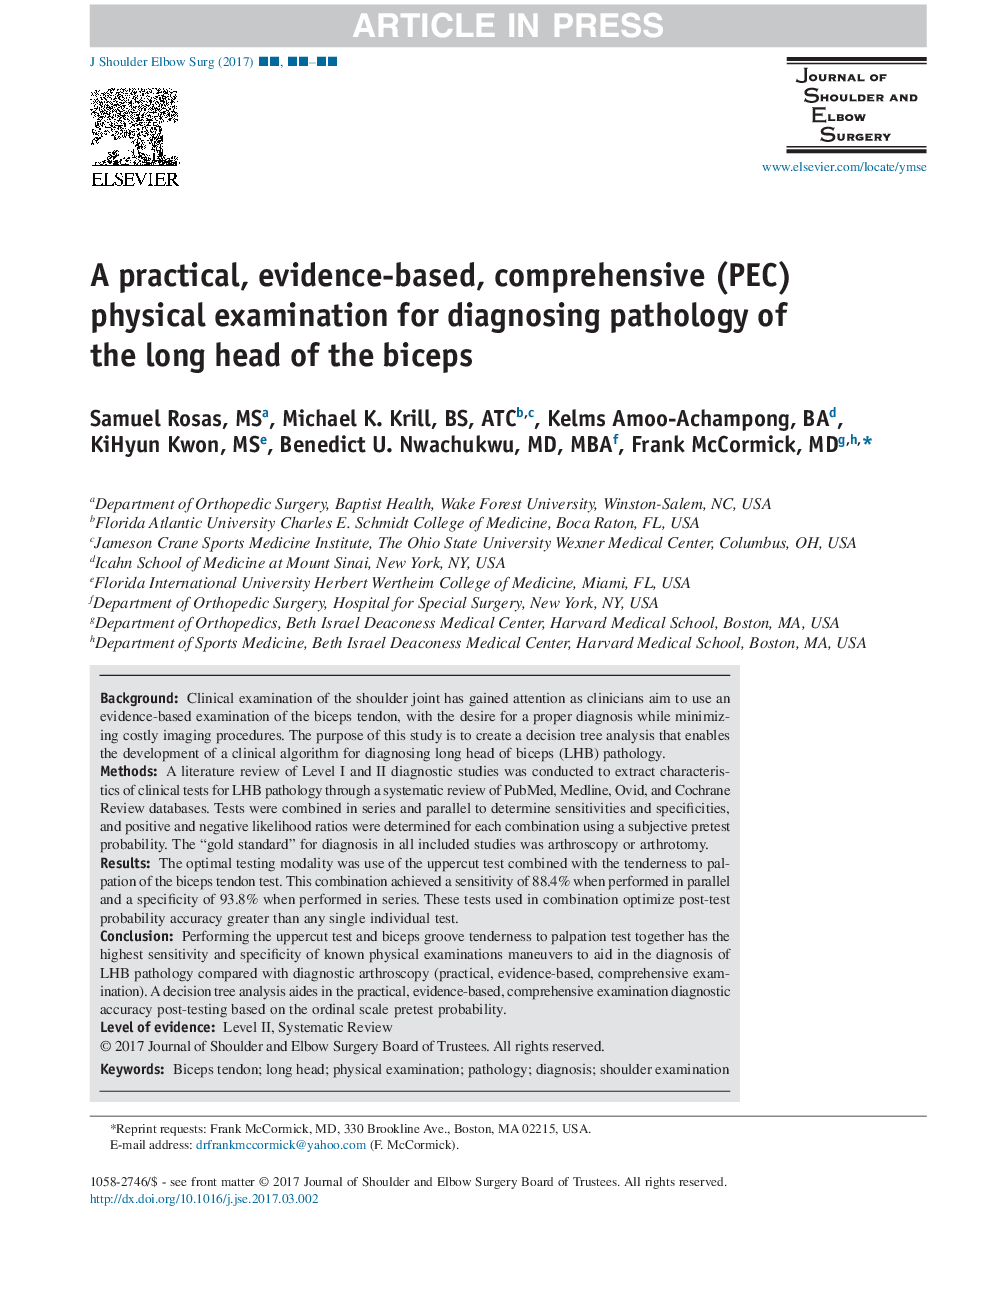 A practical, evidence-based, comprehensive (PEC) physical examination for diagnosing pathology of the long head of the biceps